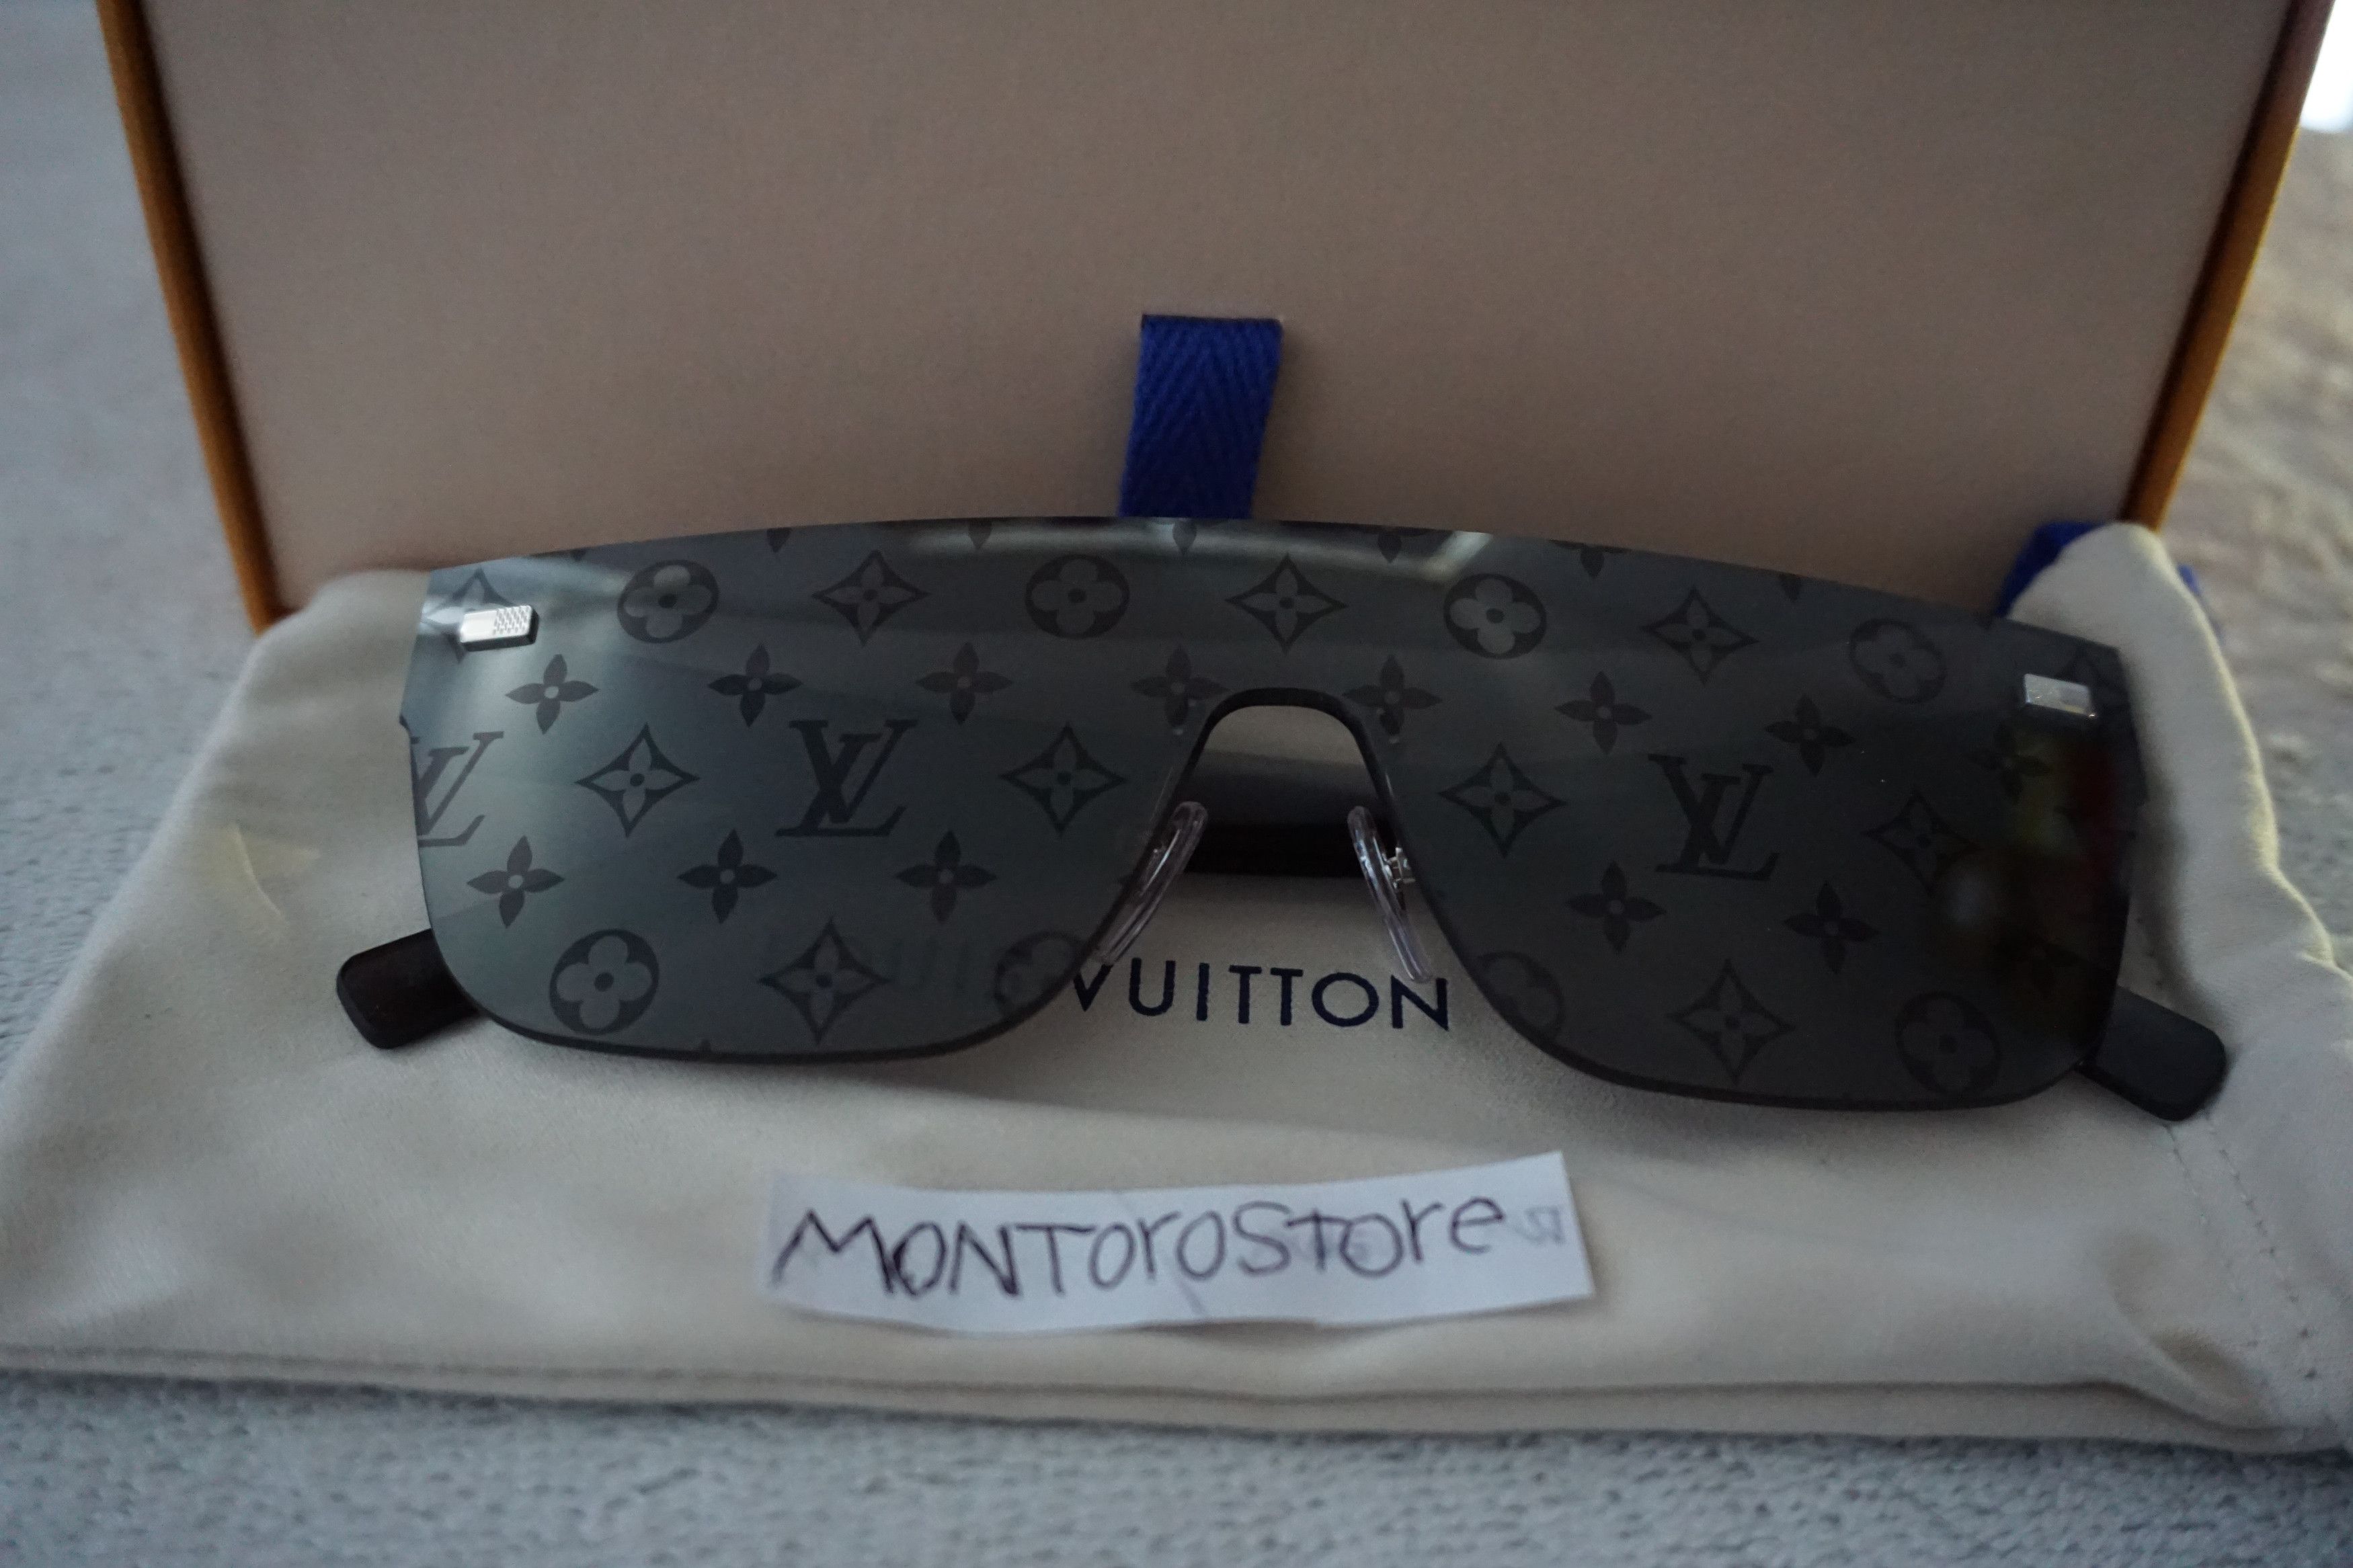 Supreme X Louis Vuitton Downtown Sunglasses for Sale in Brooklyn